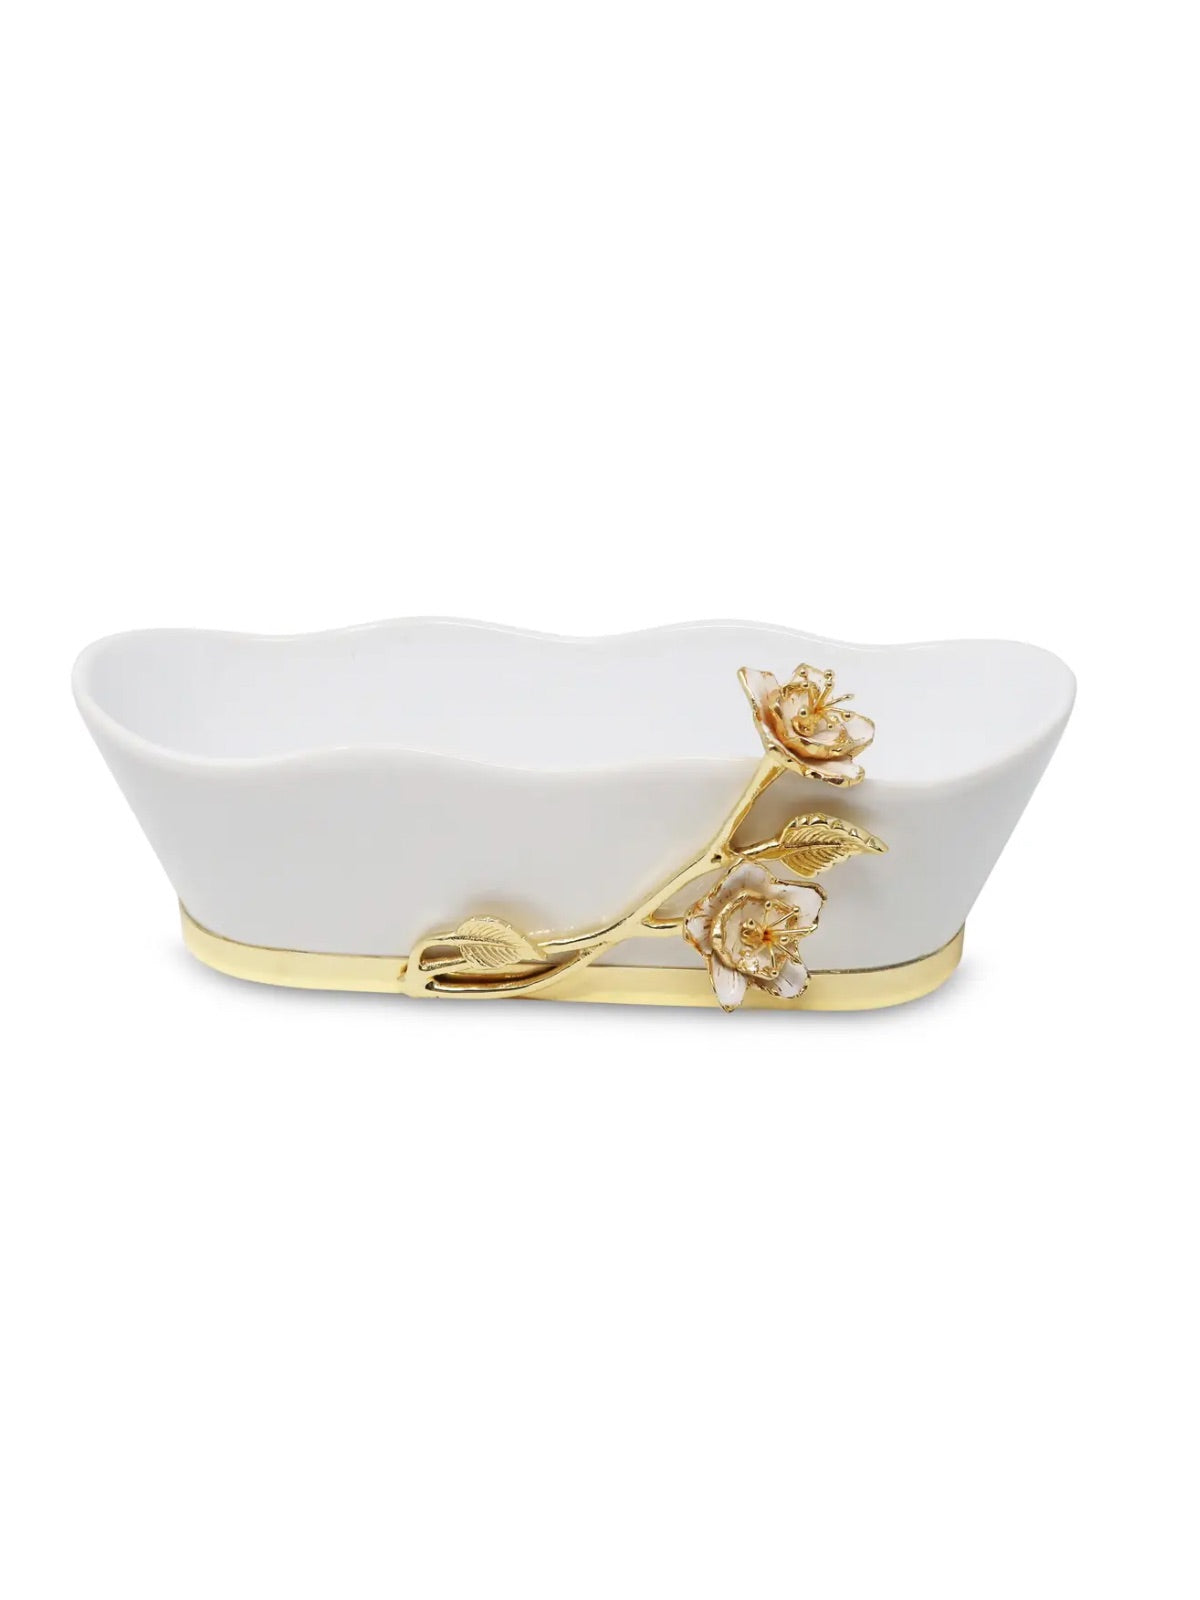 White Porcelain Rectangle Bowl with Gold Flower Detail, 11 inches. 